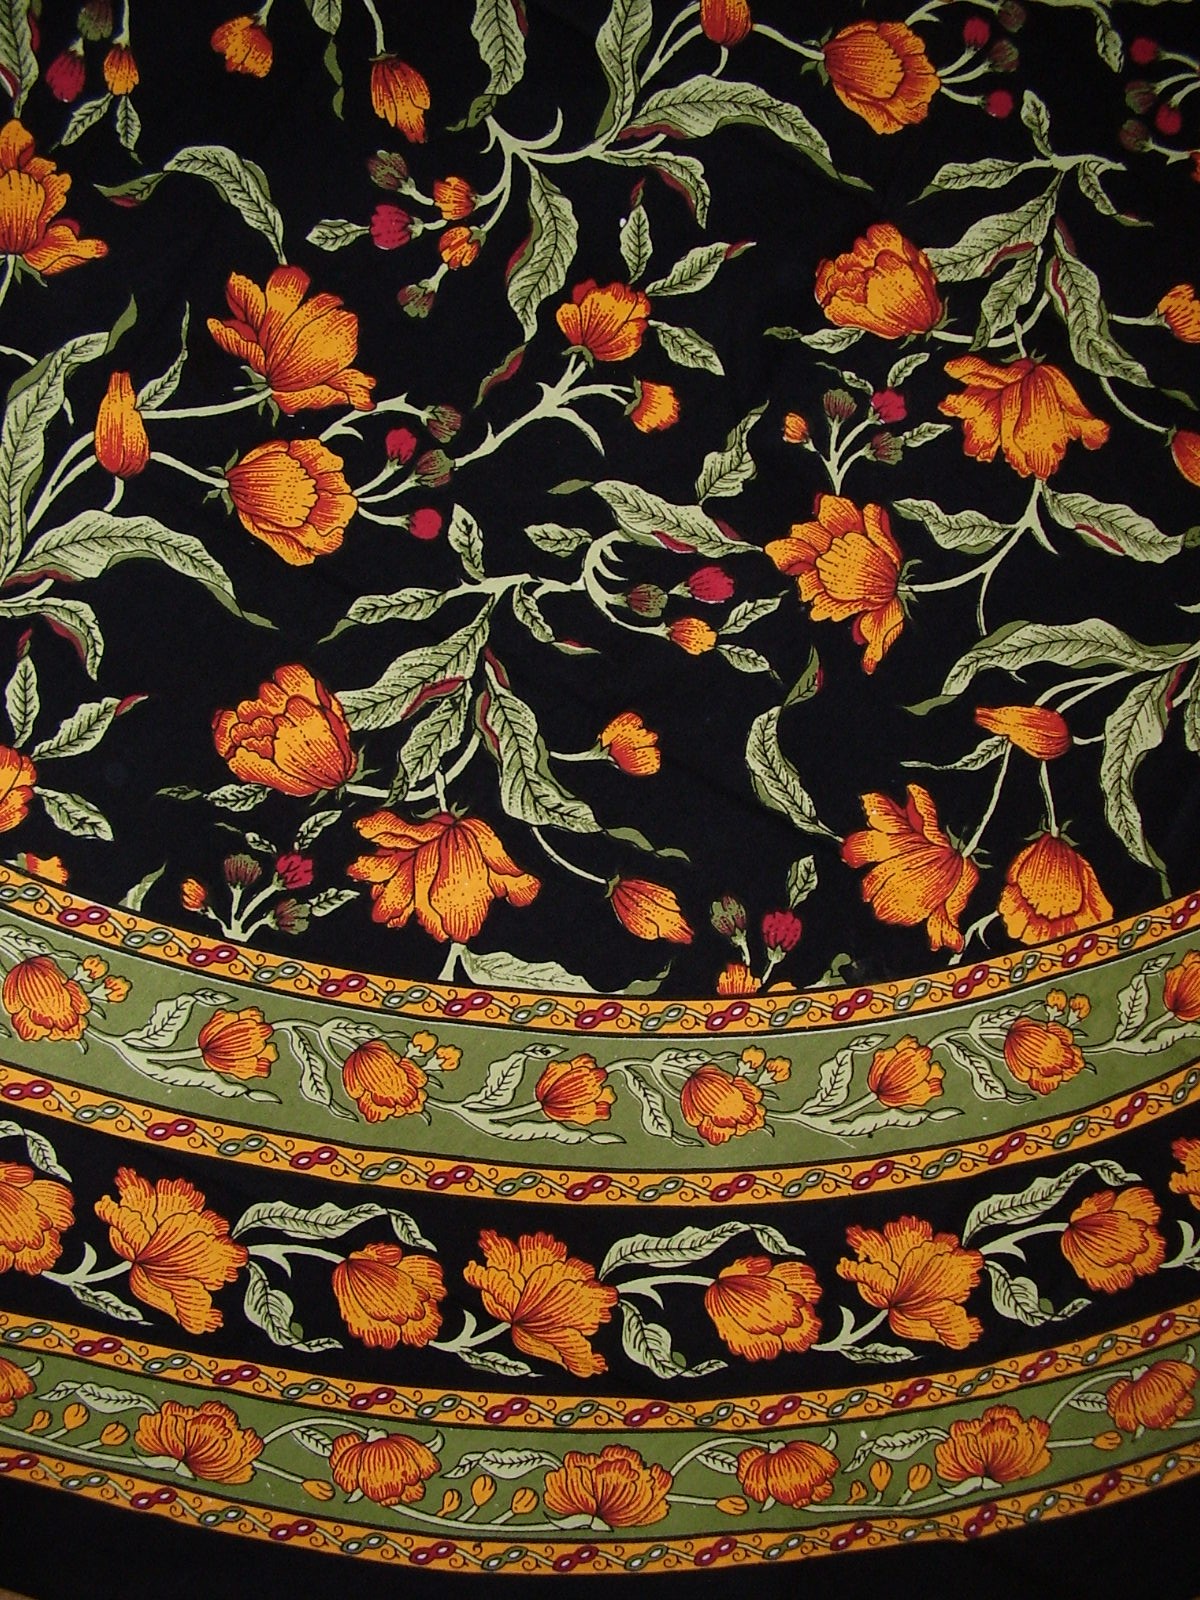 India Arts French Floral Round Cotton Tablecloth 88 Amber on Black